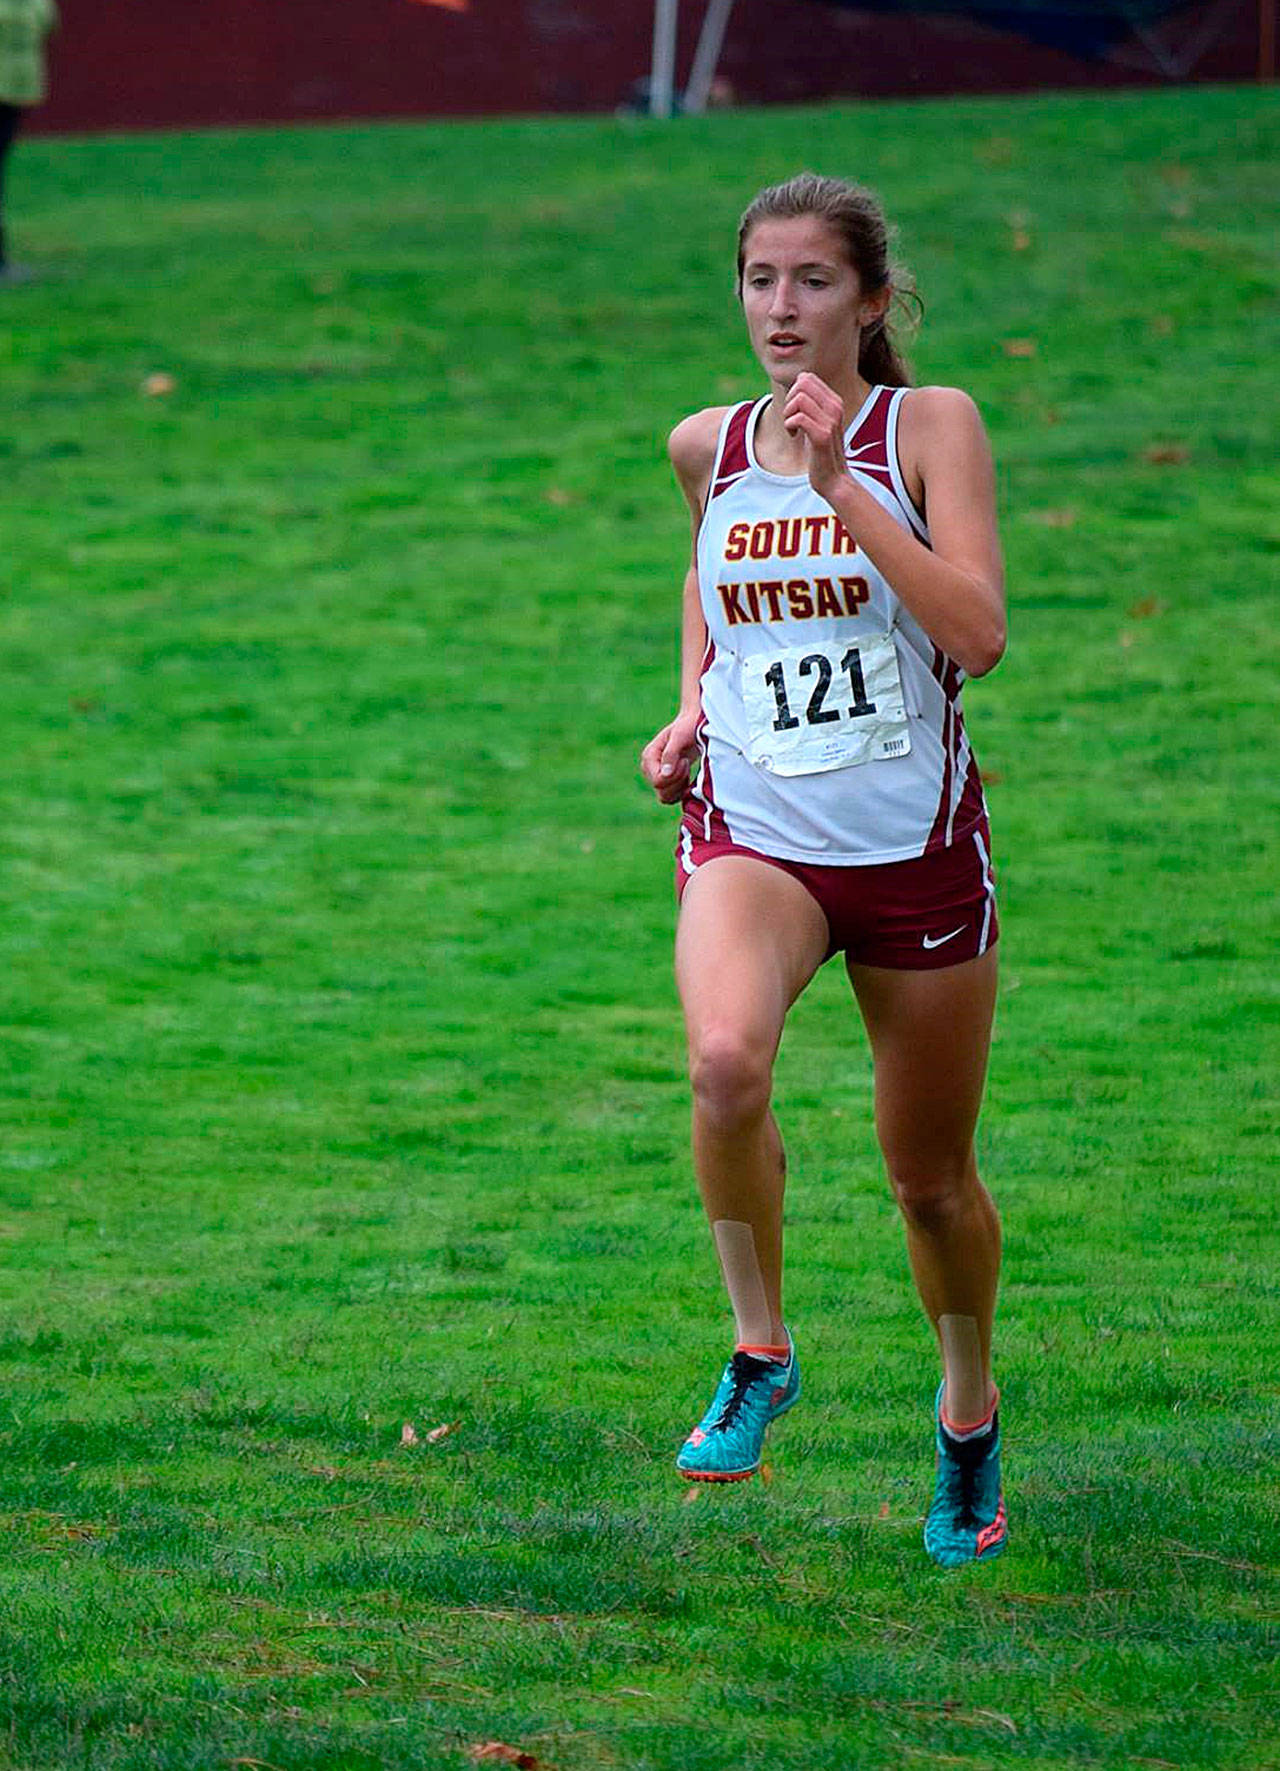 South Kitsap High’s Paxton DePoe was a state qualifier in cross country and track competition this season. Photo: Erin Fraser